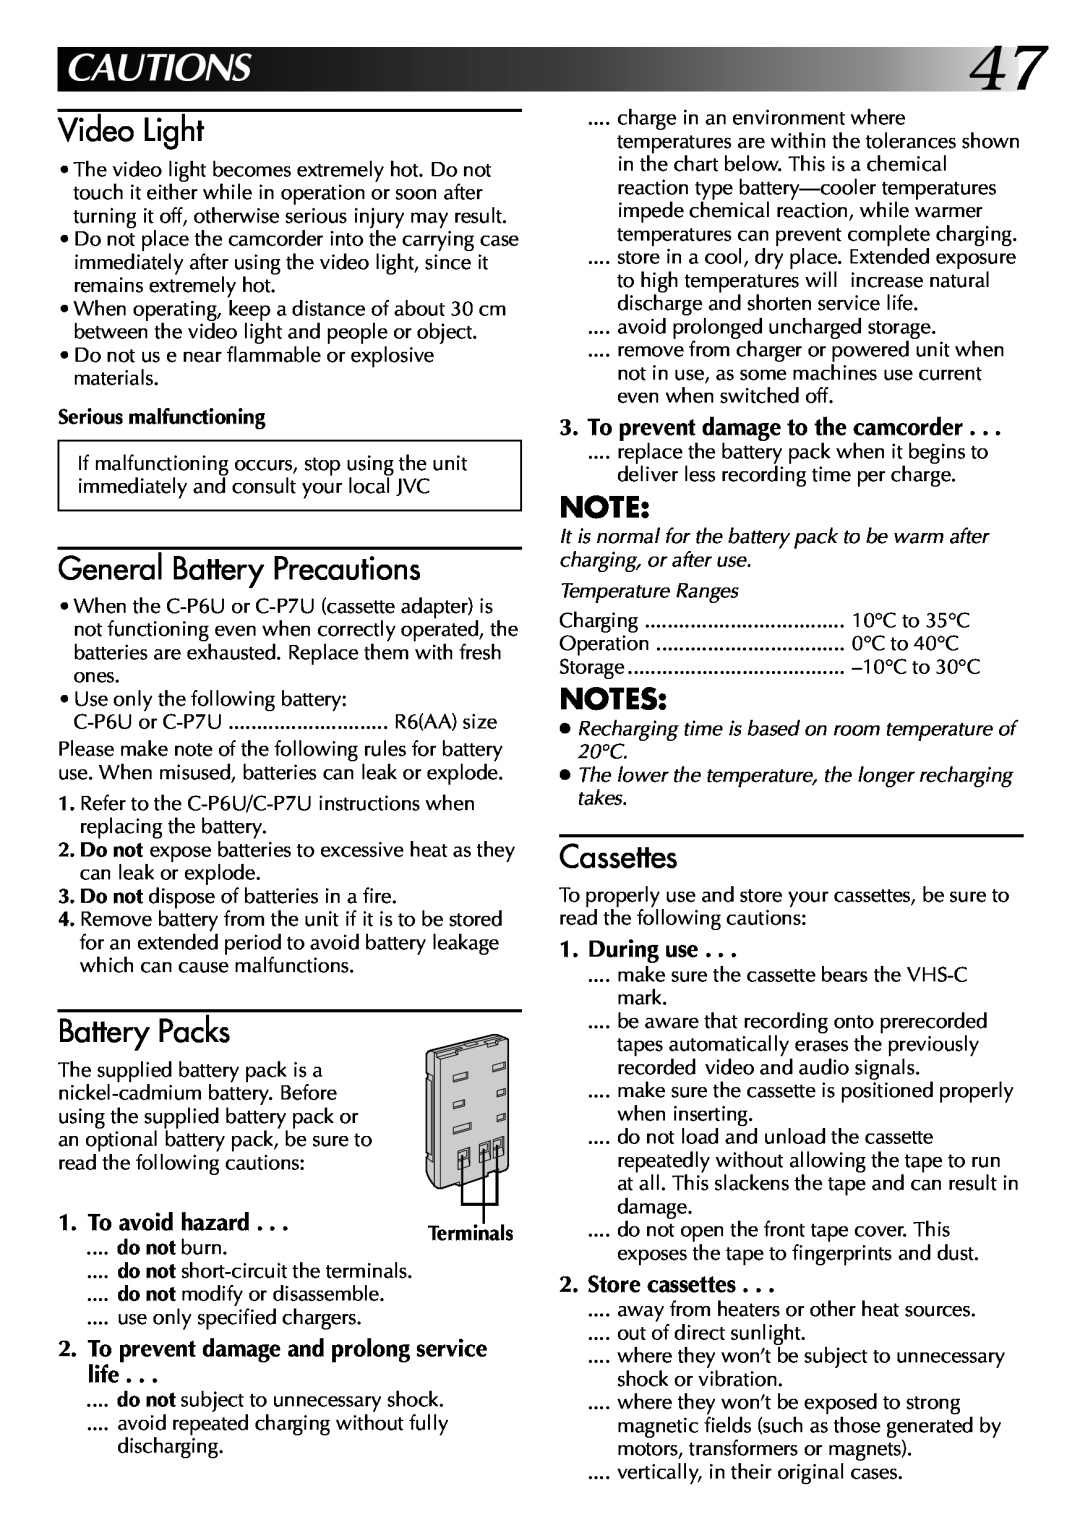 JVC GR-AX270 CAUTIONS47, Video Light, General Battery Precautions, Battery Packs, Cassettes, To avoid hazard, During use 